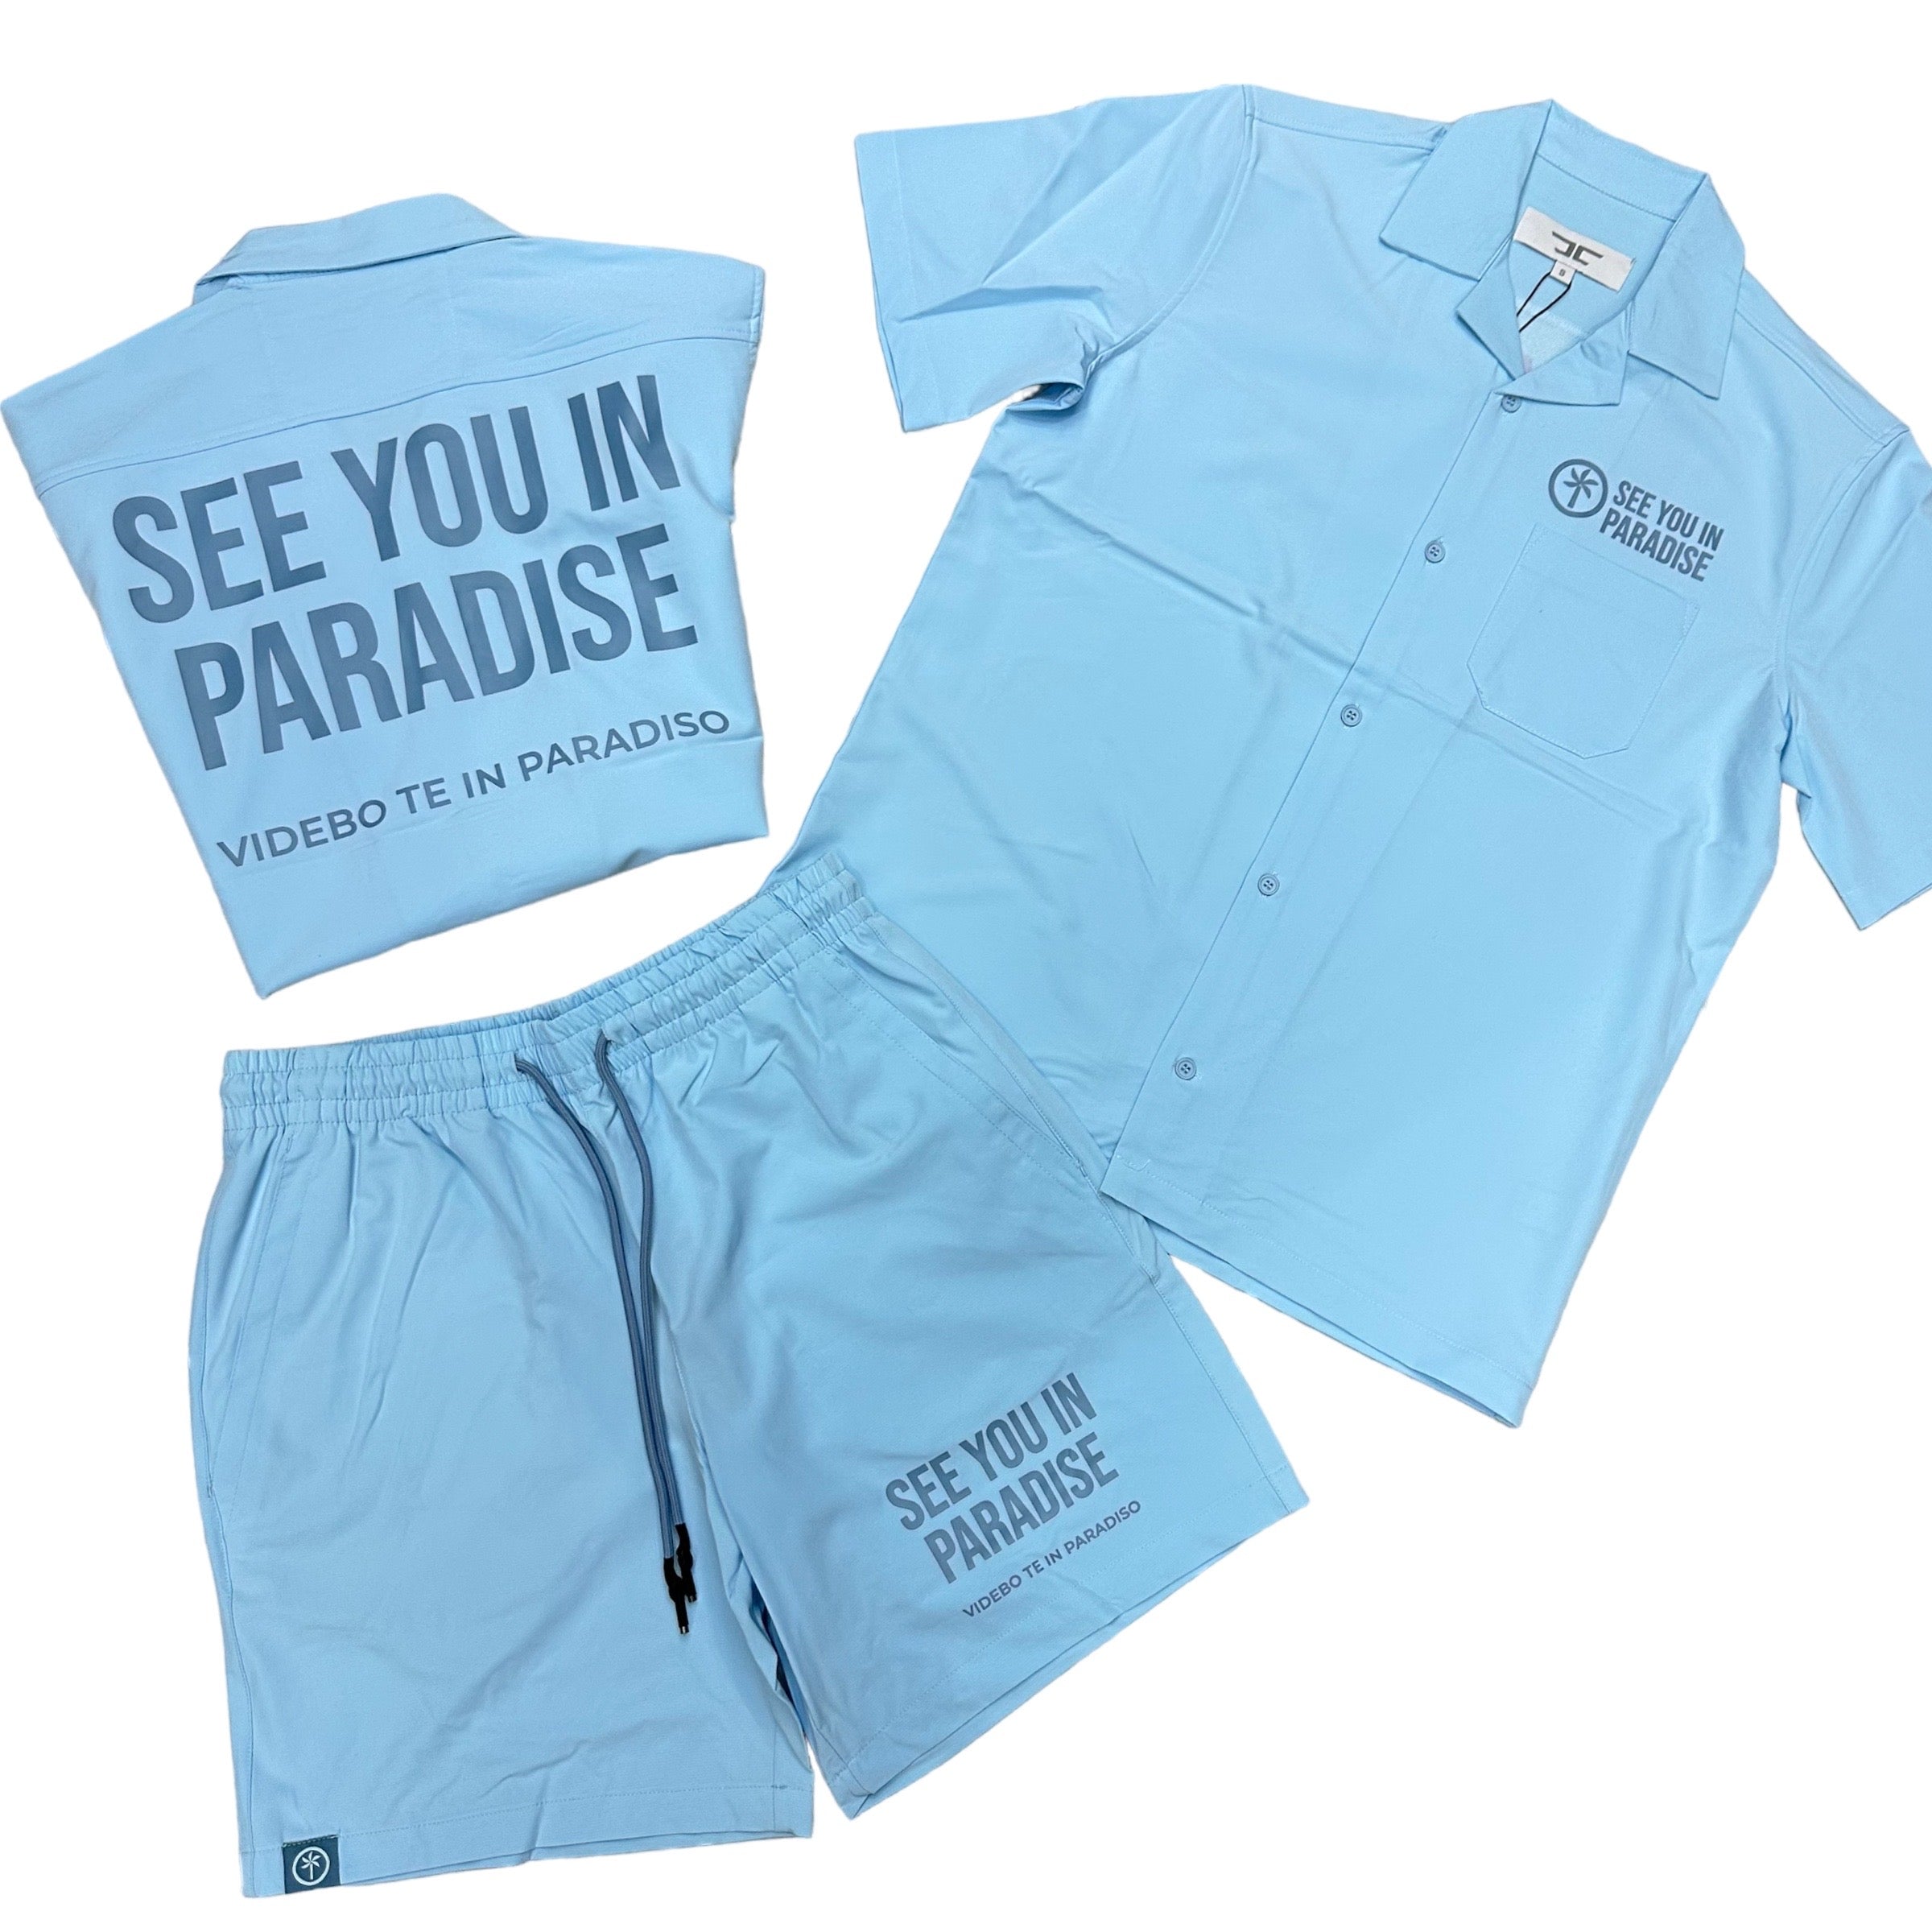 JC See You In Paradise TONE Shirt Set Blue 2554